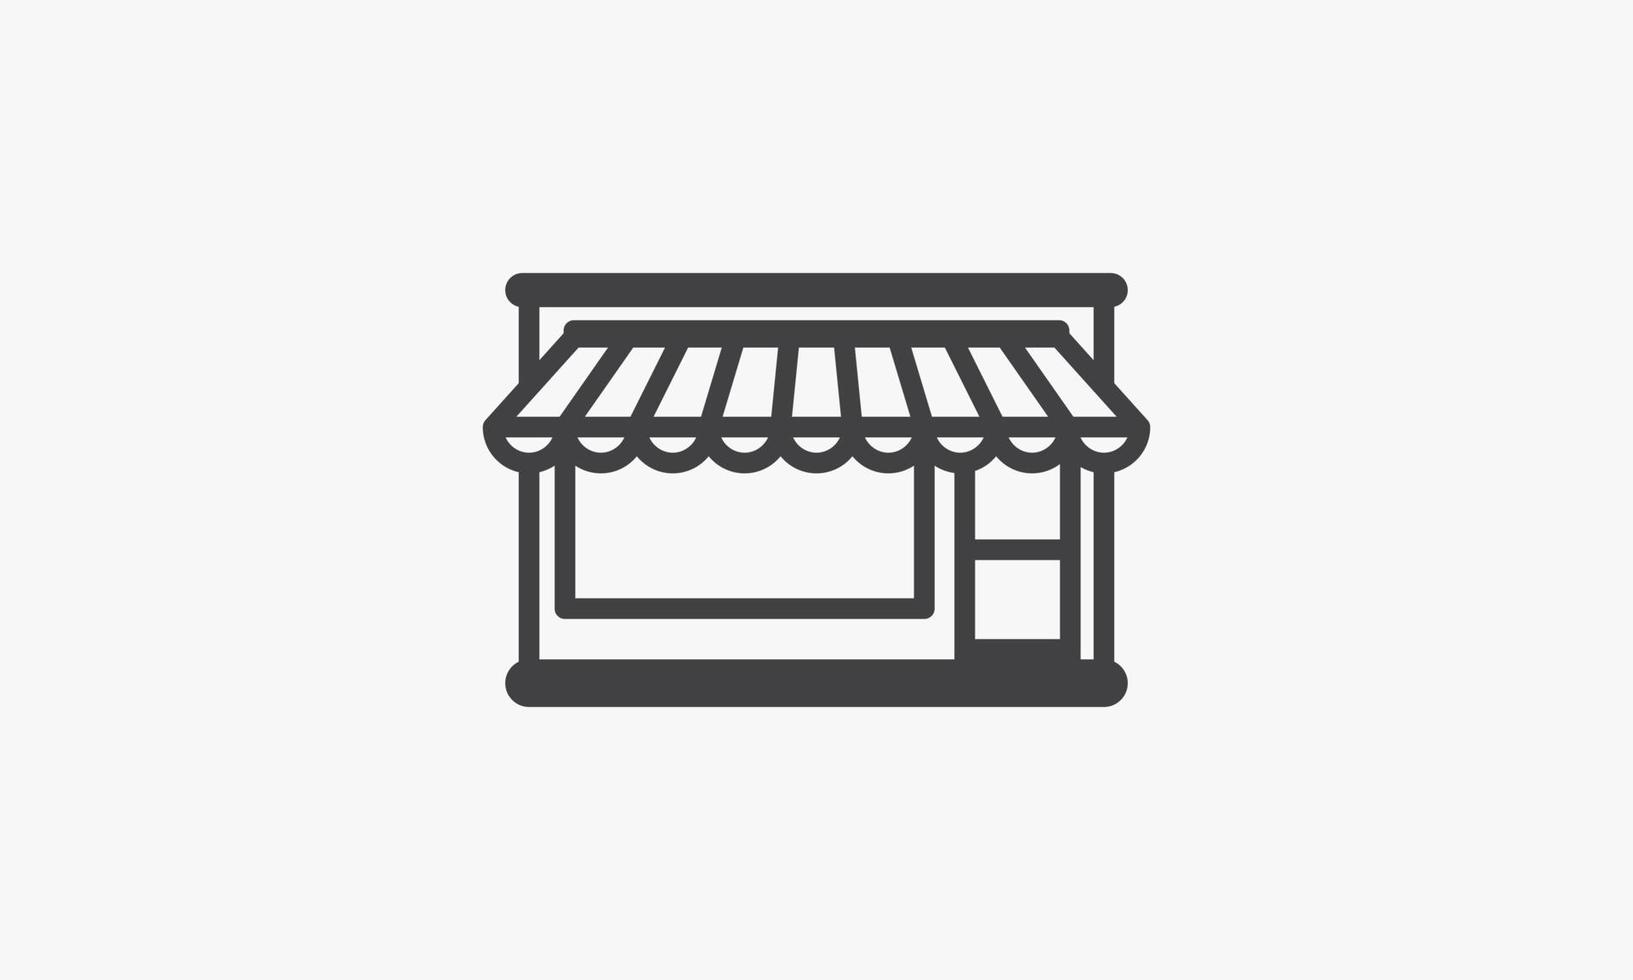 store icon. vector illustration. isolated on white background.